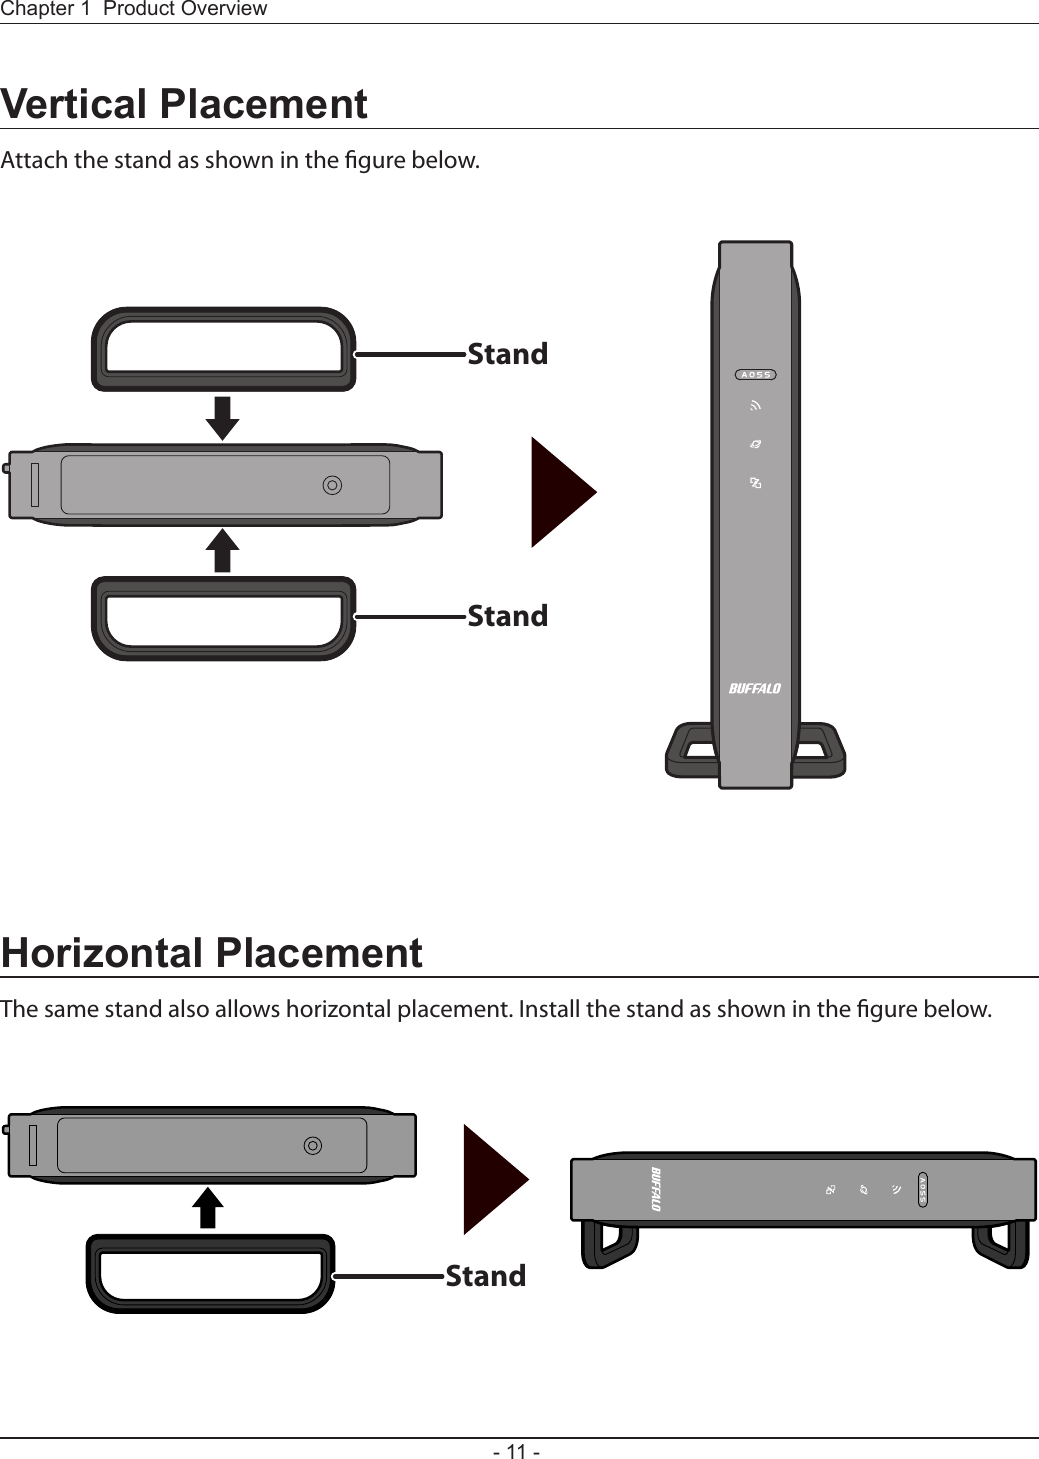 StandStandStandChapter 1  Product Overview- 11 -Vertical PlacementAttach the stand as shown in the gure below.Horizontal PlacementThe same stand also allows horizontal placement. Install the stand as shown in the gure below.